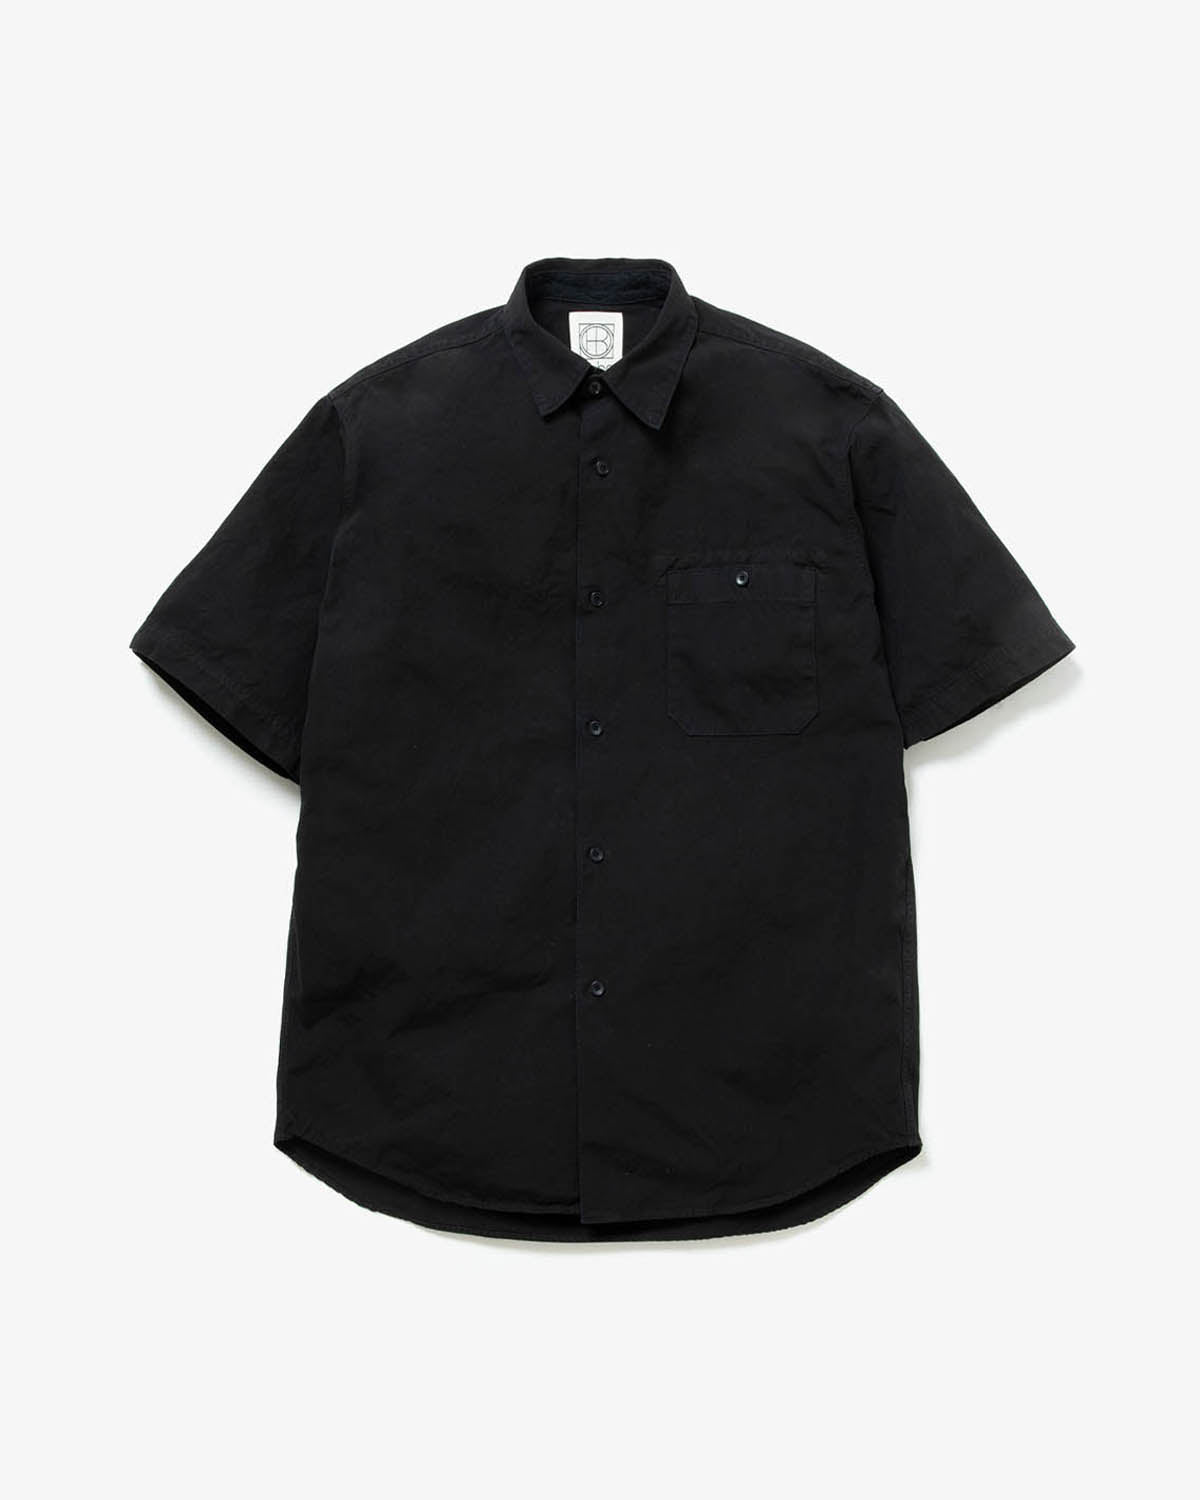 S/S SHIRT COTTON WEATHER CLOTH OVERDYED